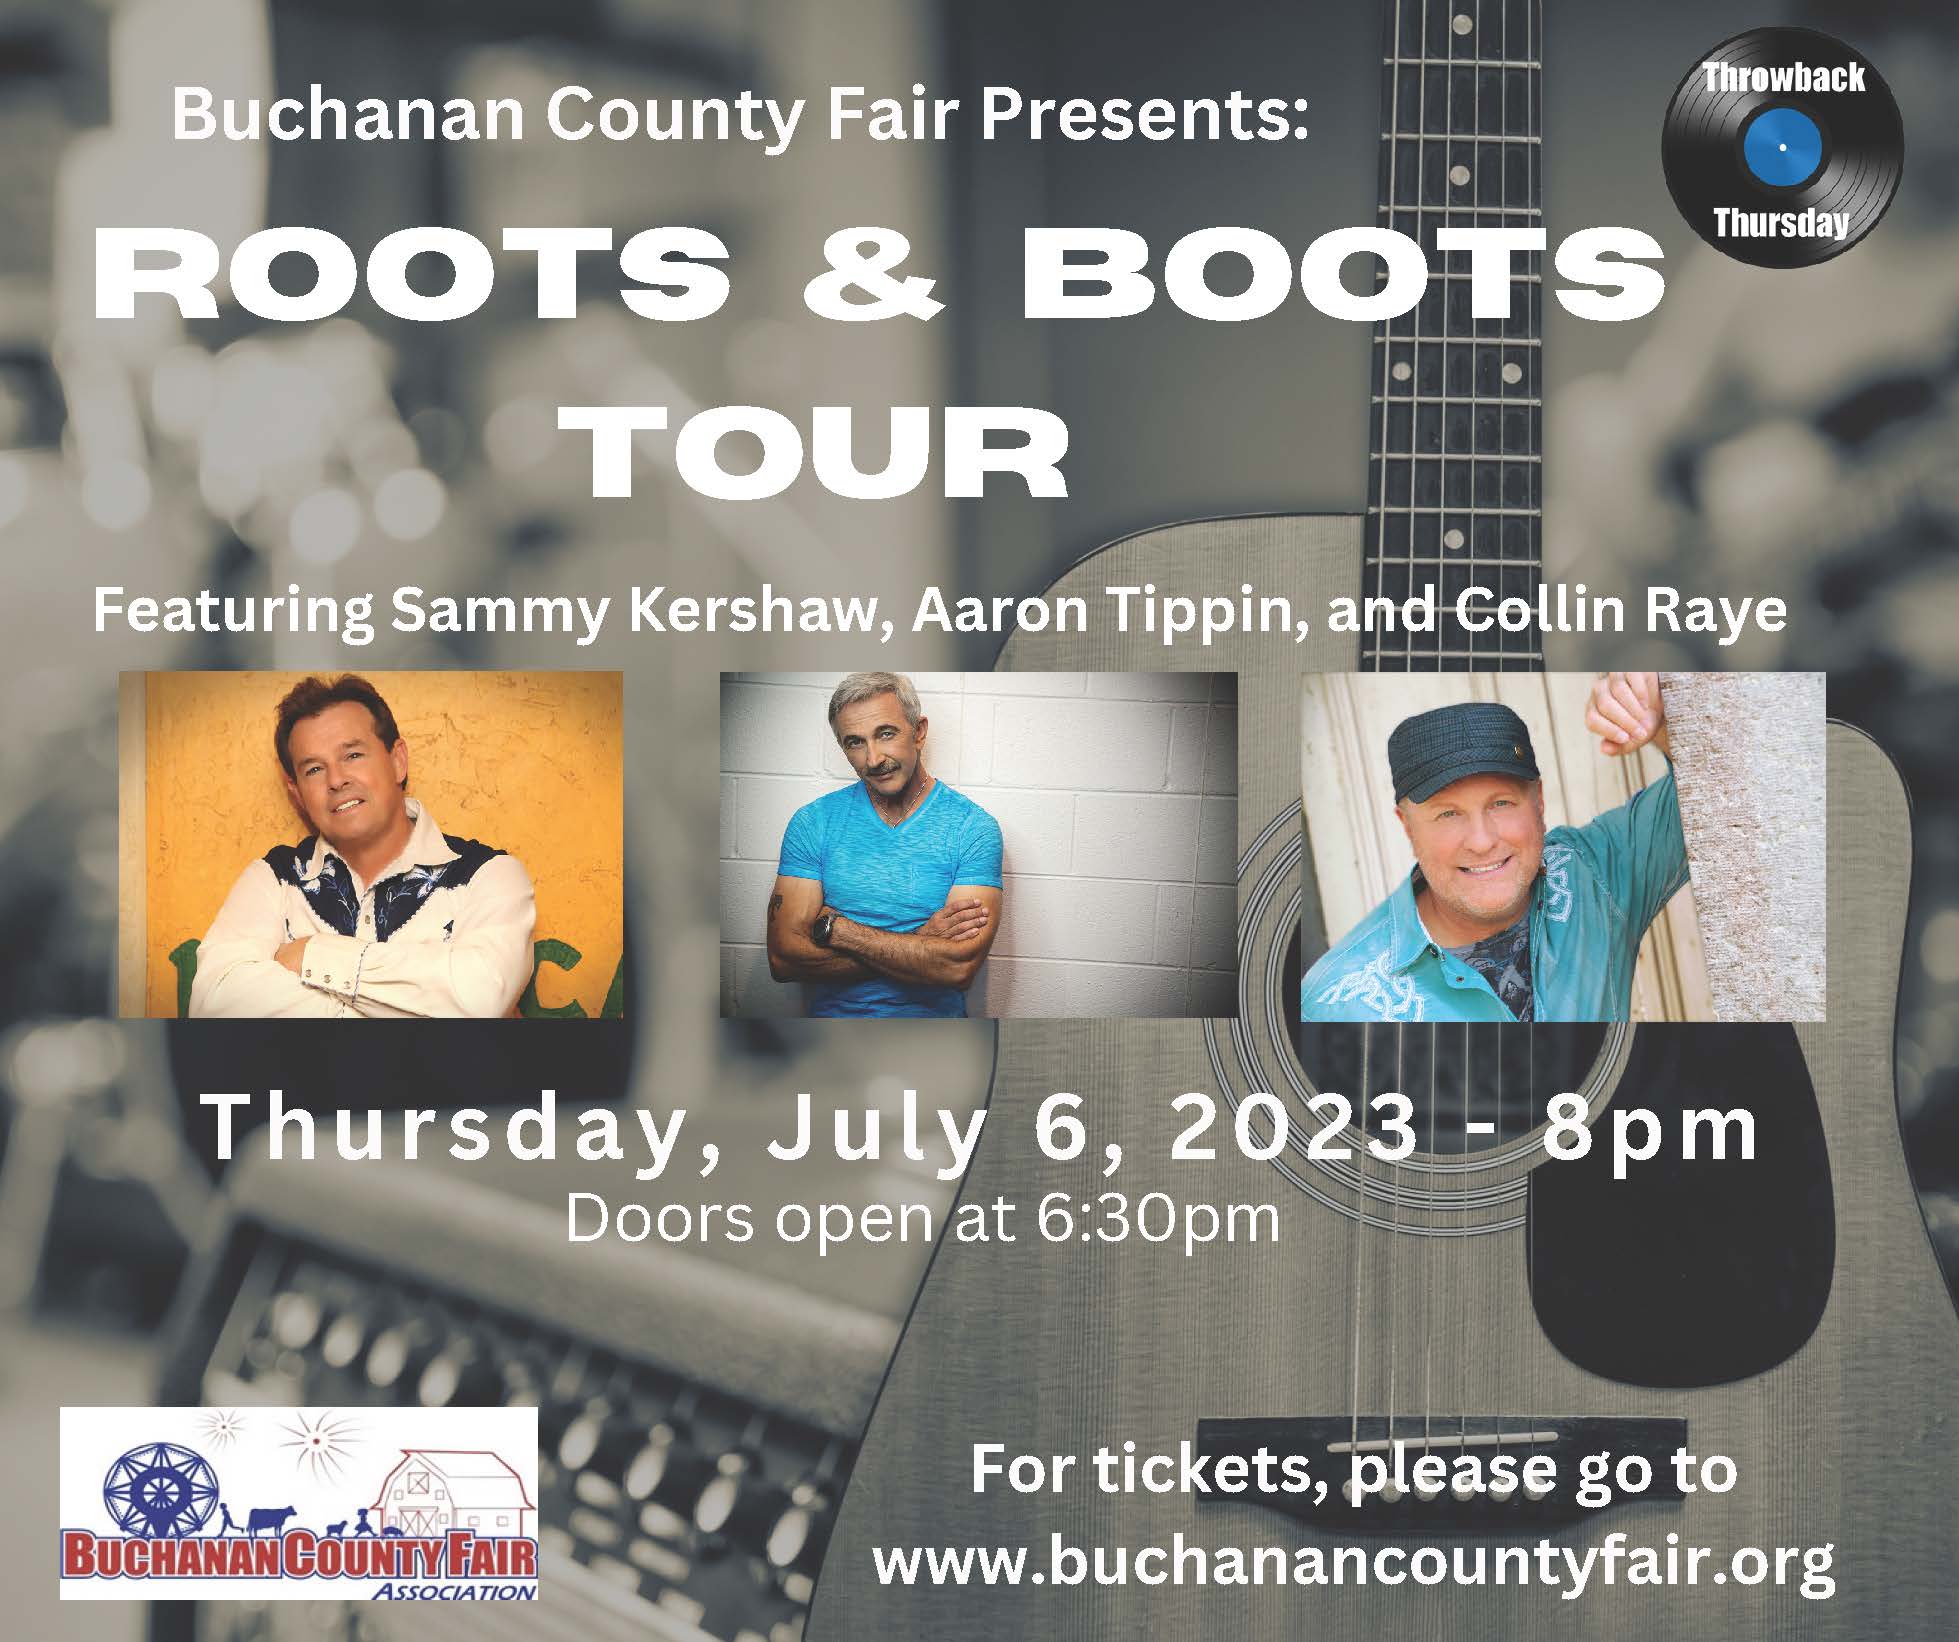 2023 Concert Roots & Boots Tour Thursday, July 6th Buchanan County